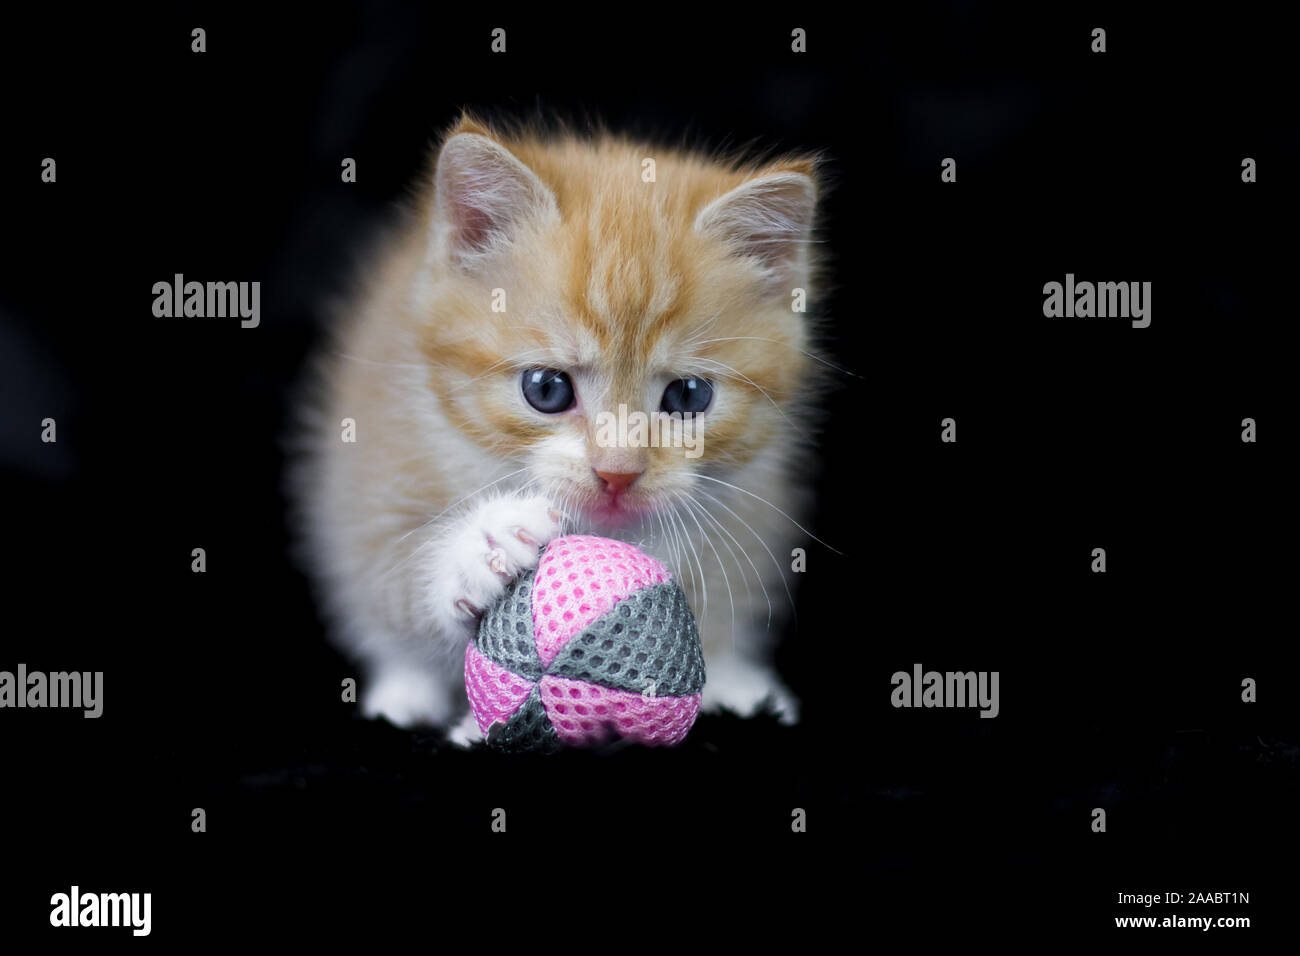 Red tabby kitten playing with a ball, 5 weeks old, studio photo with black background Stock Photo